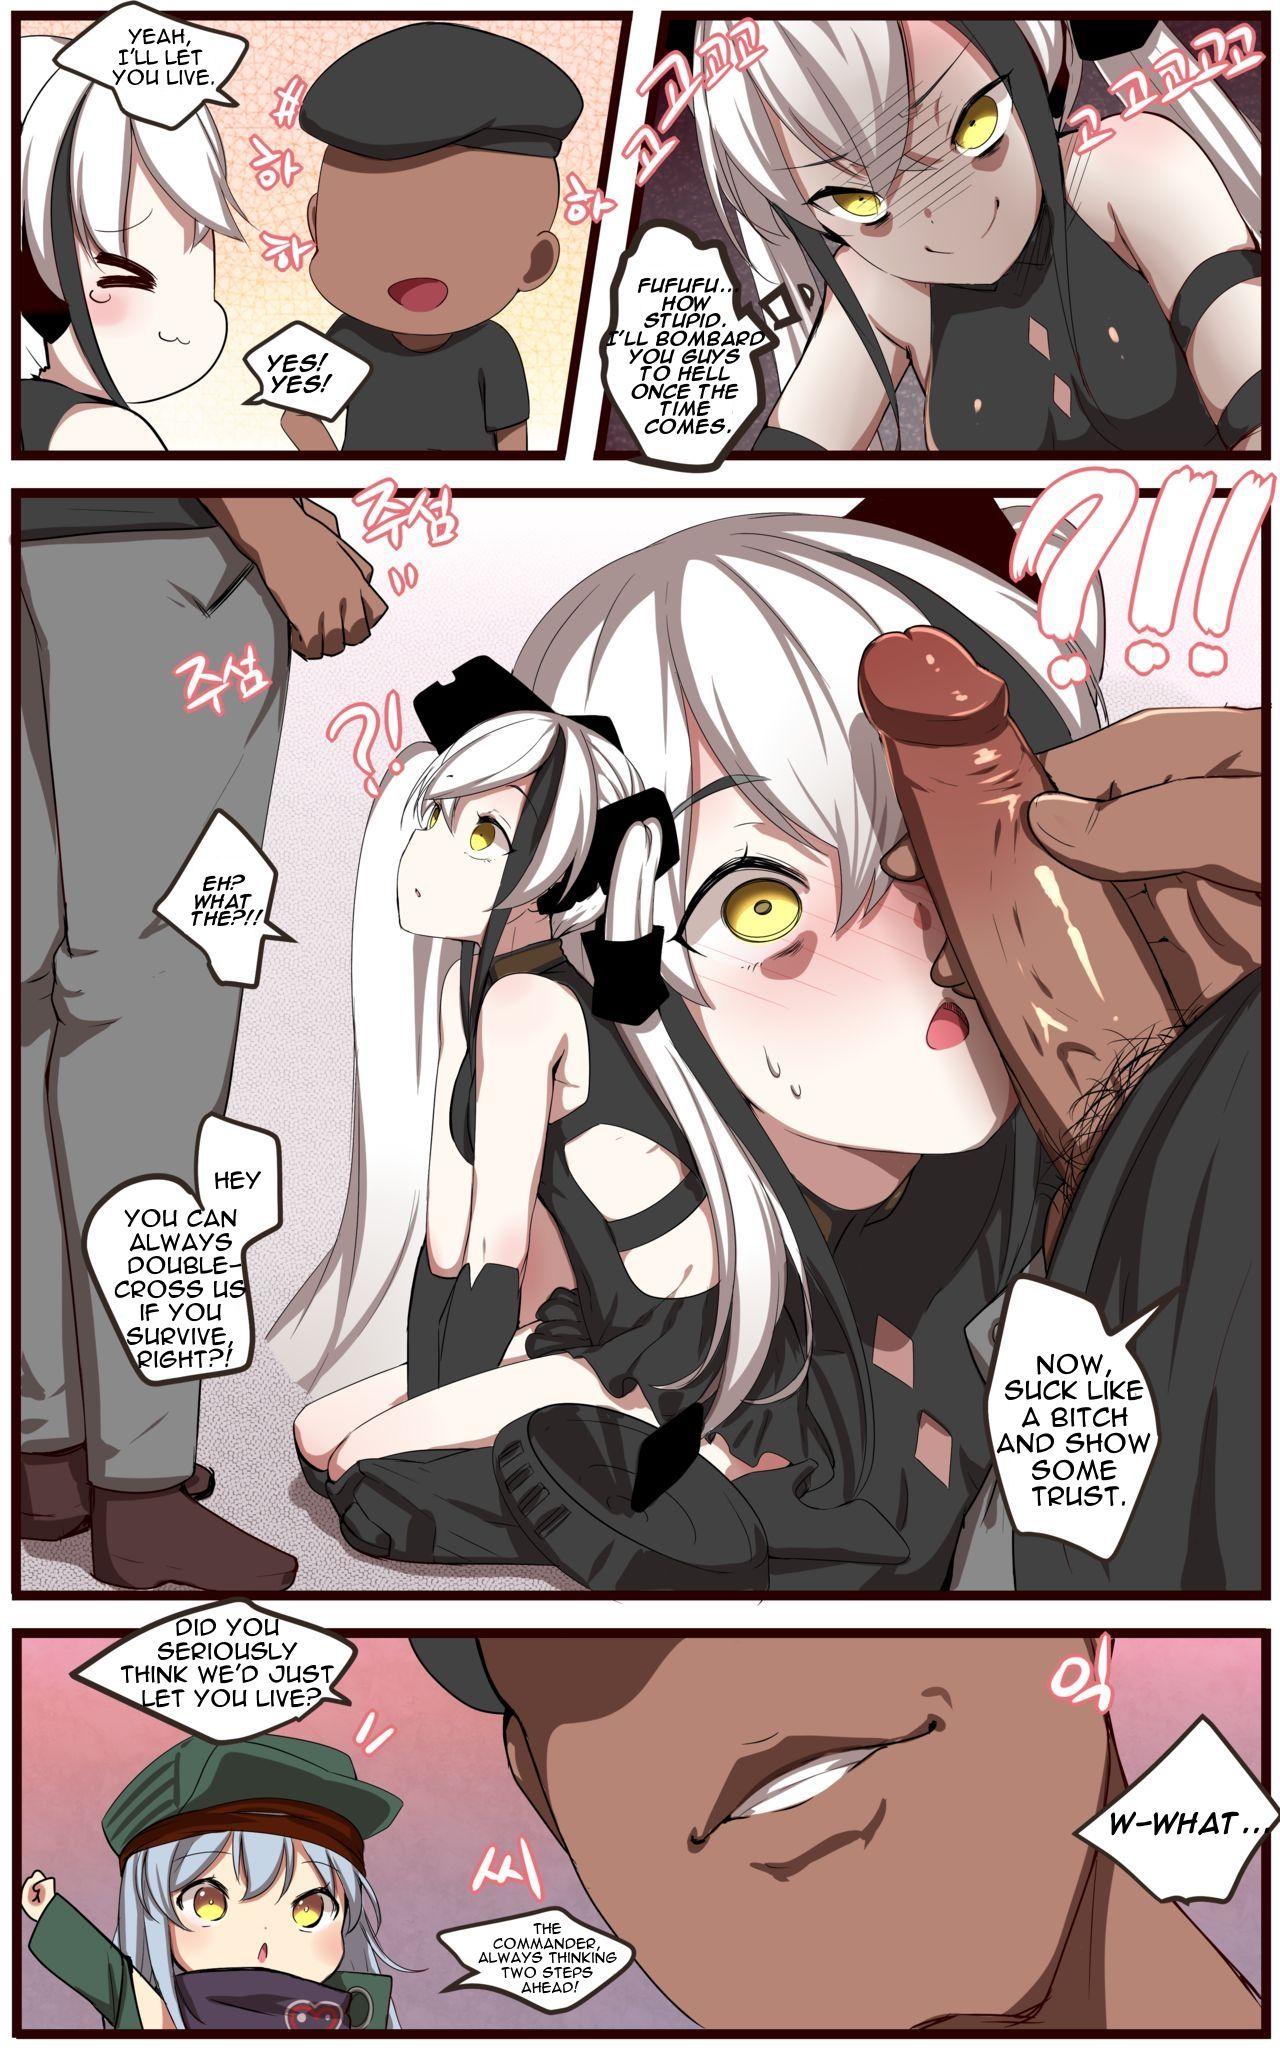 Stepmom How to use dolls 06 - Girls frontline Hairy - Page 4